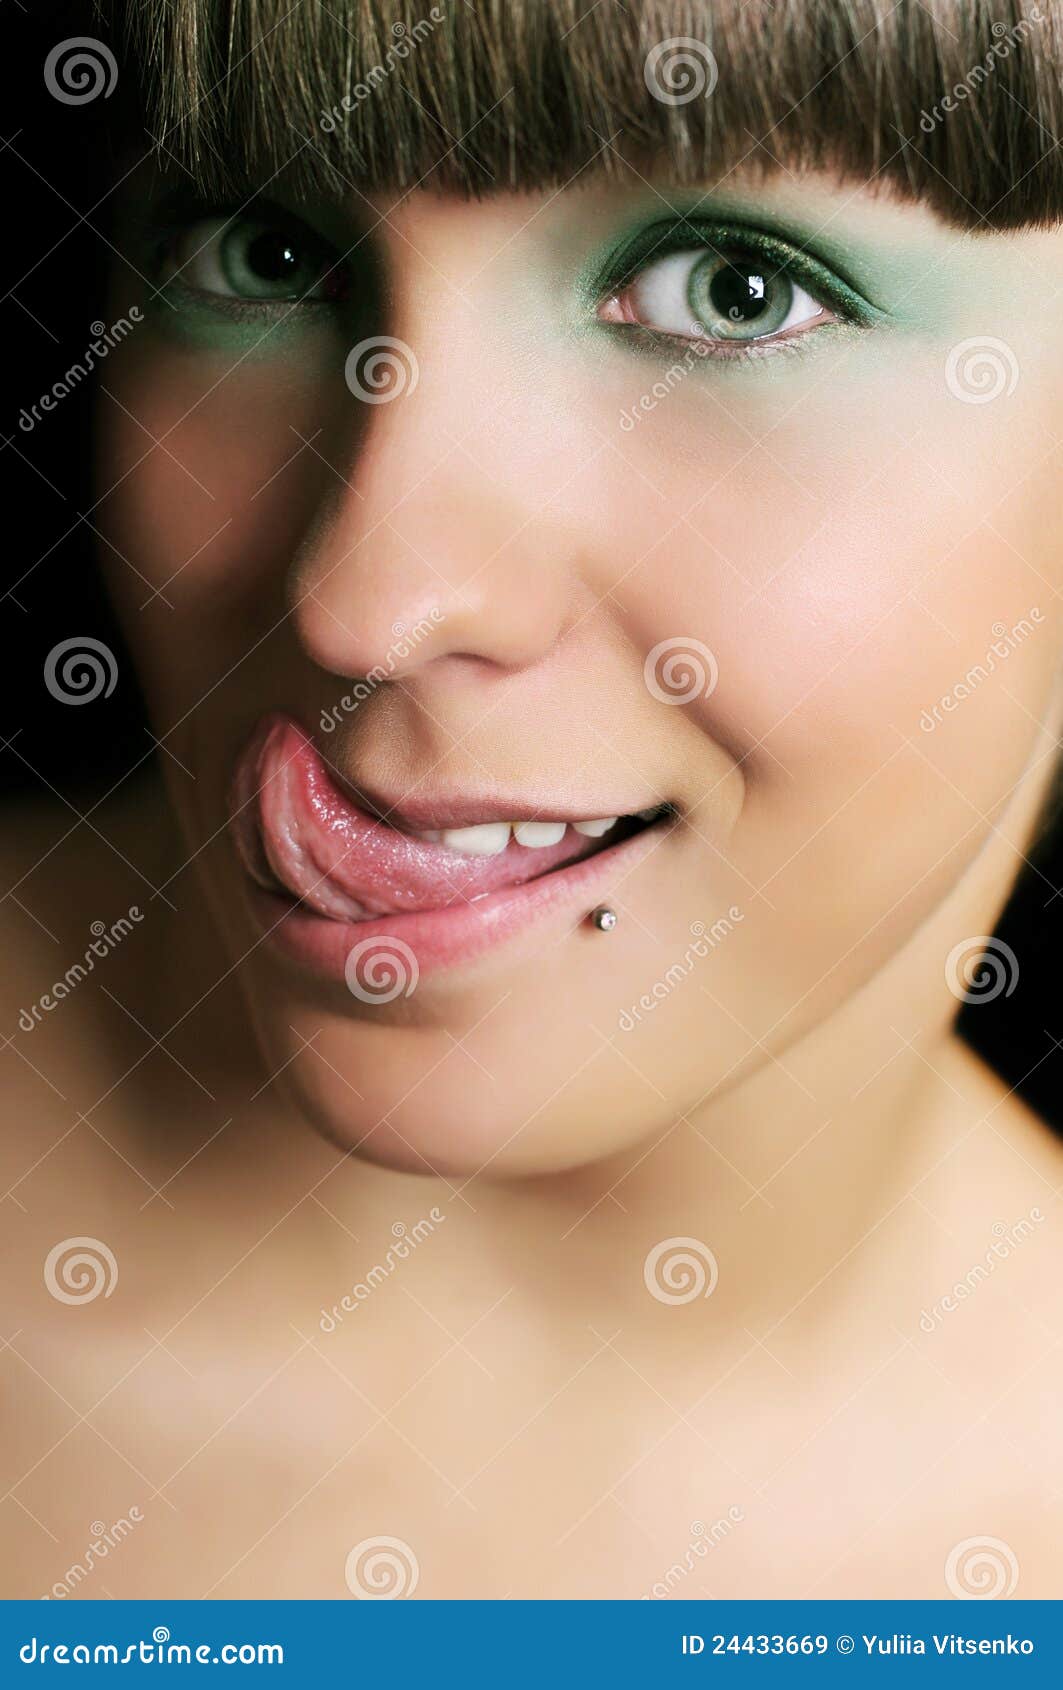 Funny Expressive Teen Girl Sticking Out Tongue Stock Image Image Of